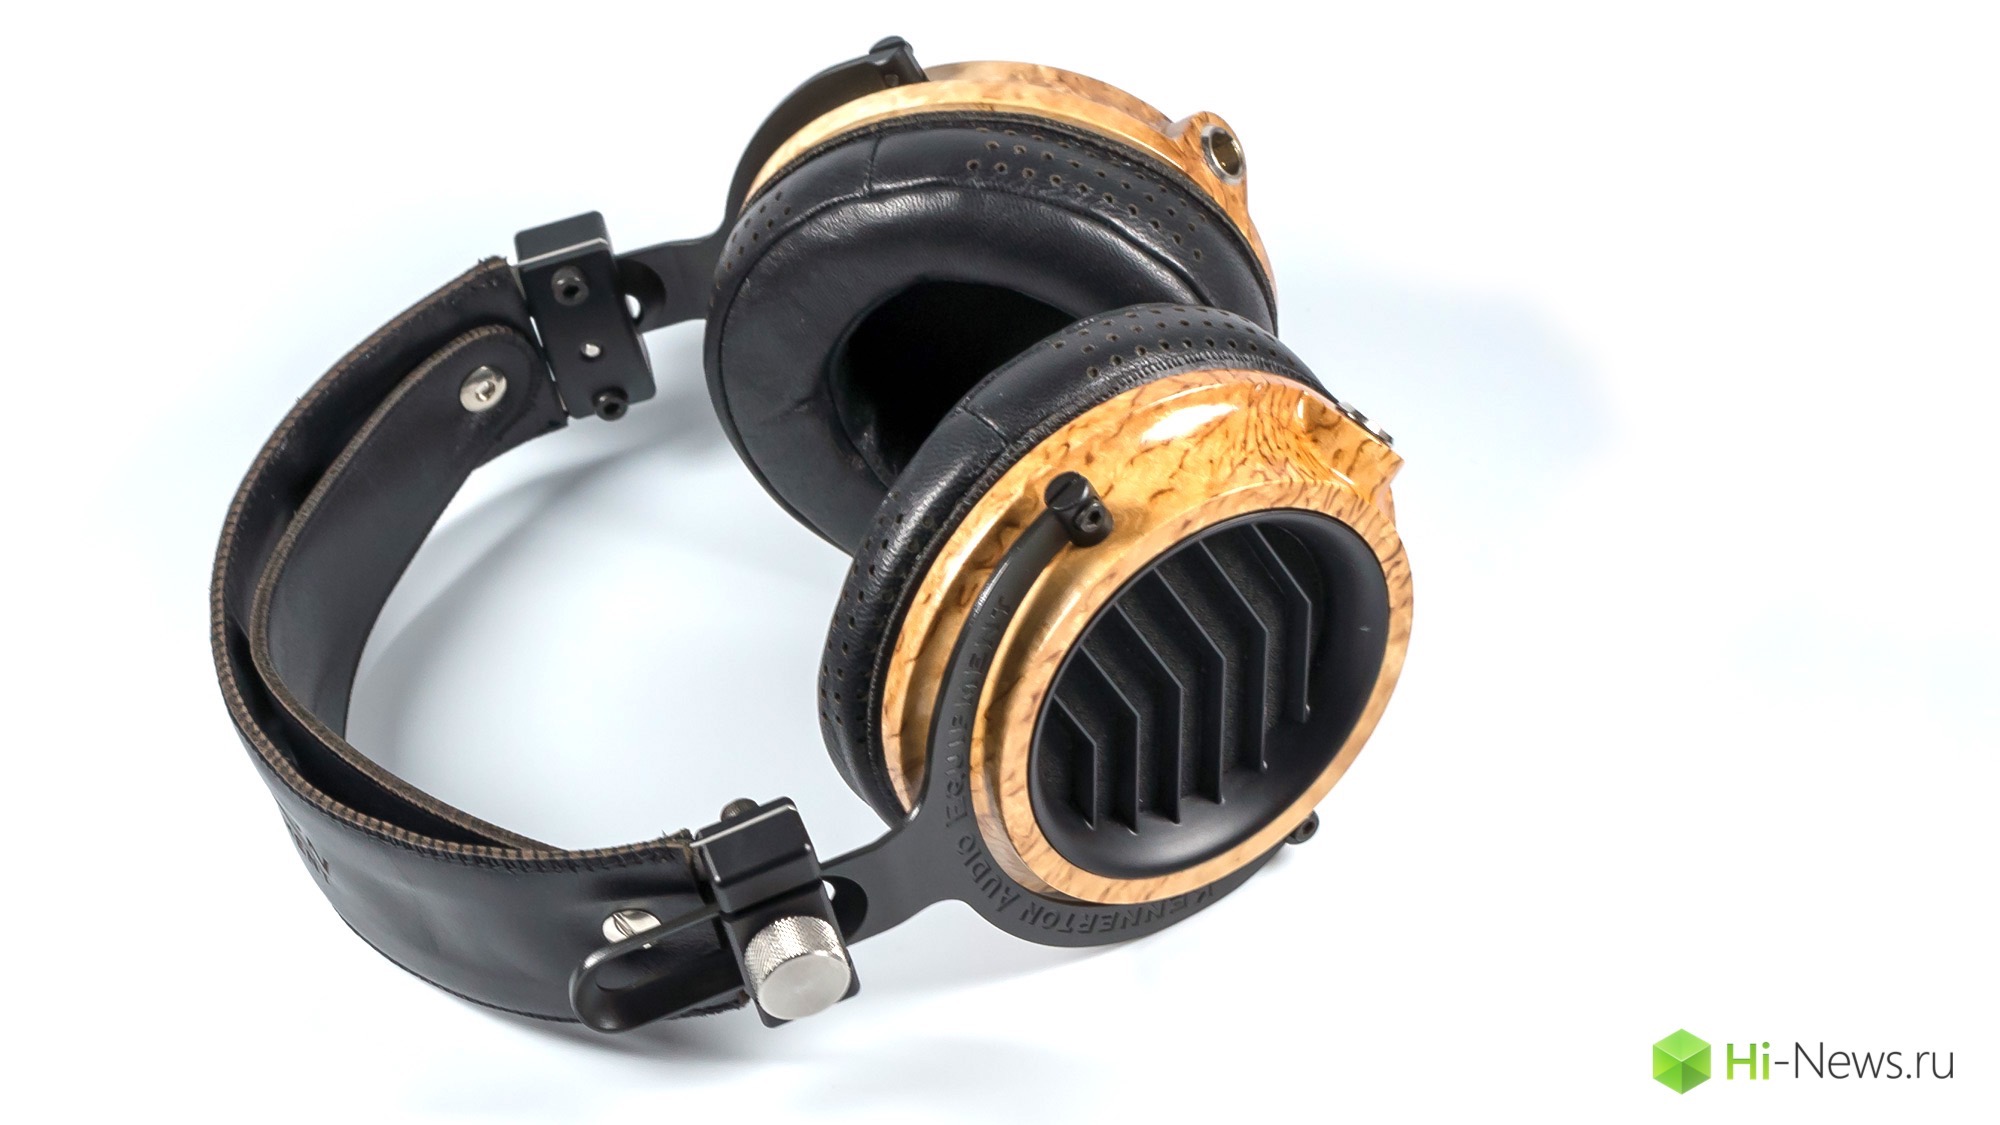 Review headphones Kennerton Odin — now from the wood of Yggdrasil